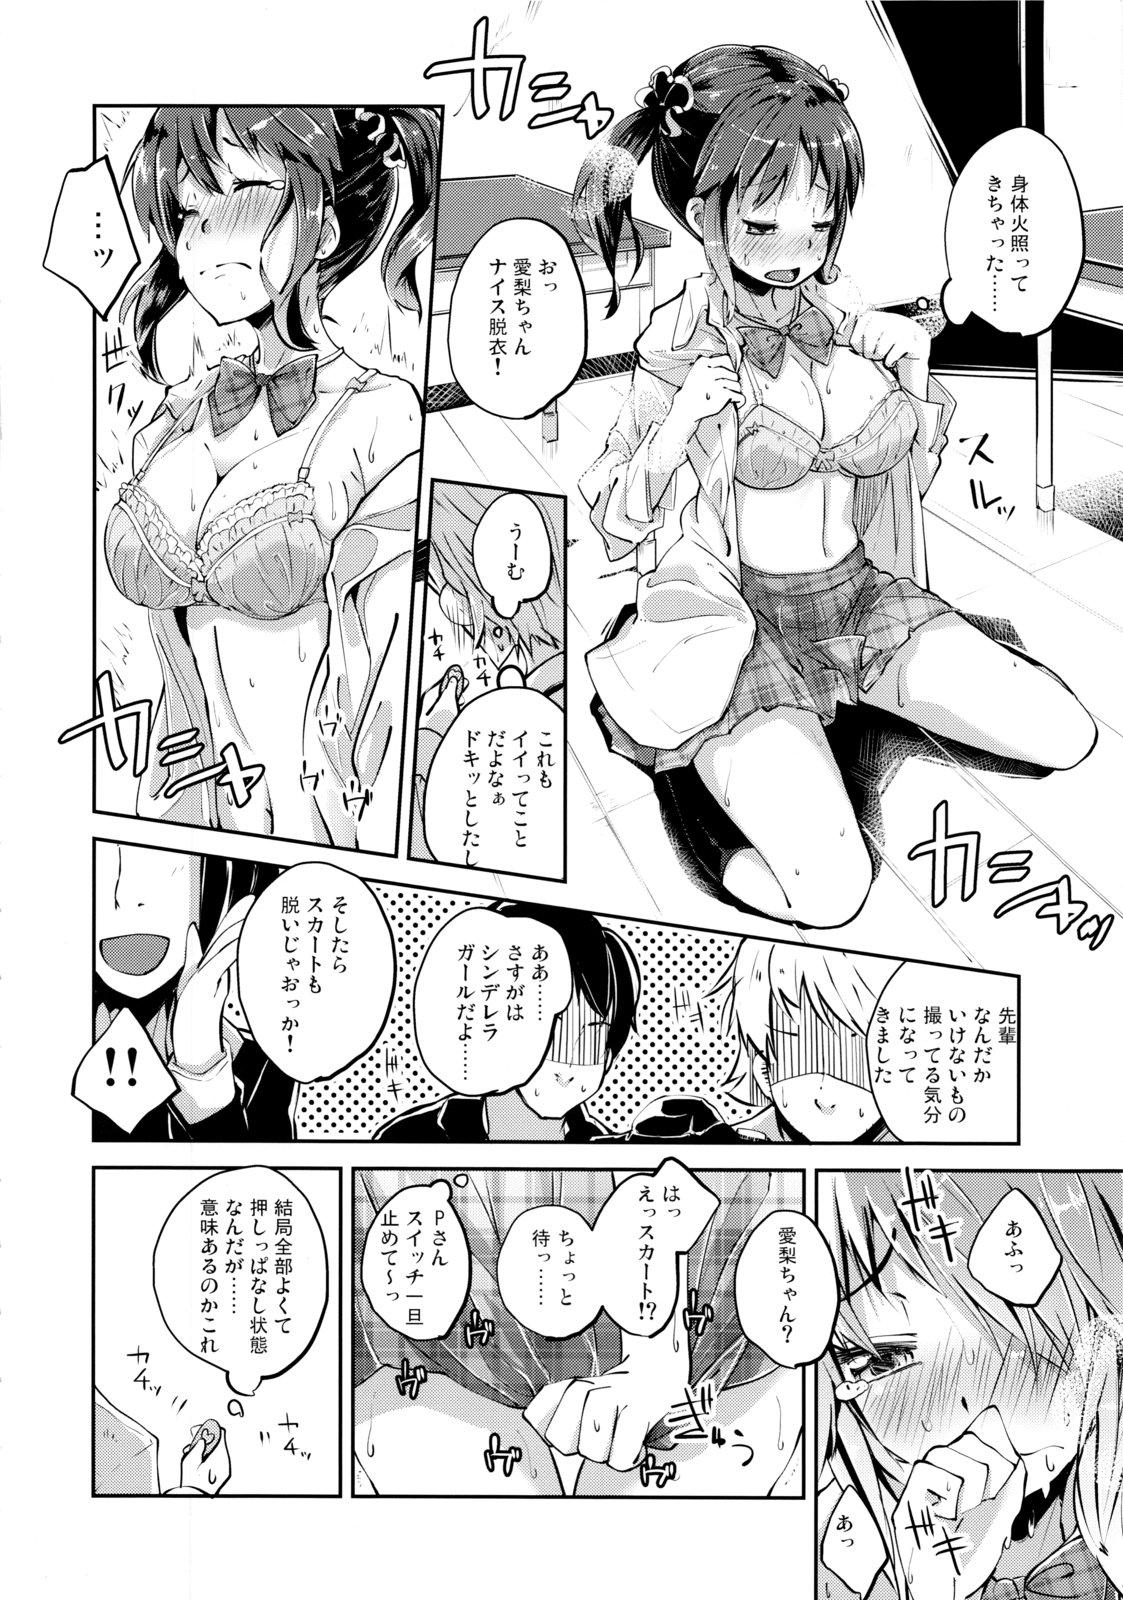 Ebony To To Dolce - The idolmaster Shaven - Page 5